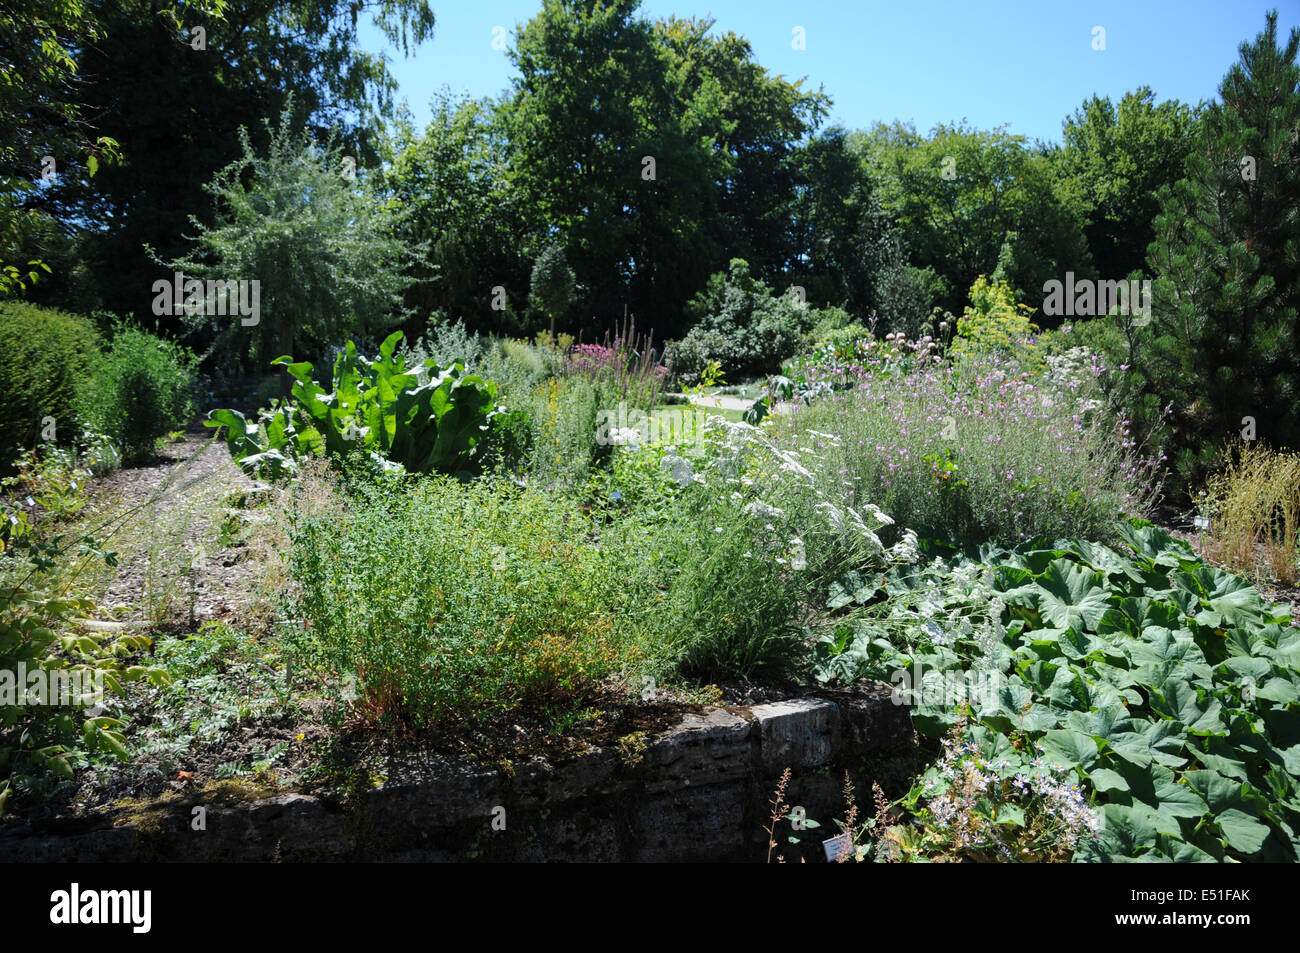 Garden with medical plants Stock Photo